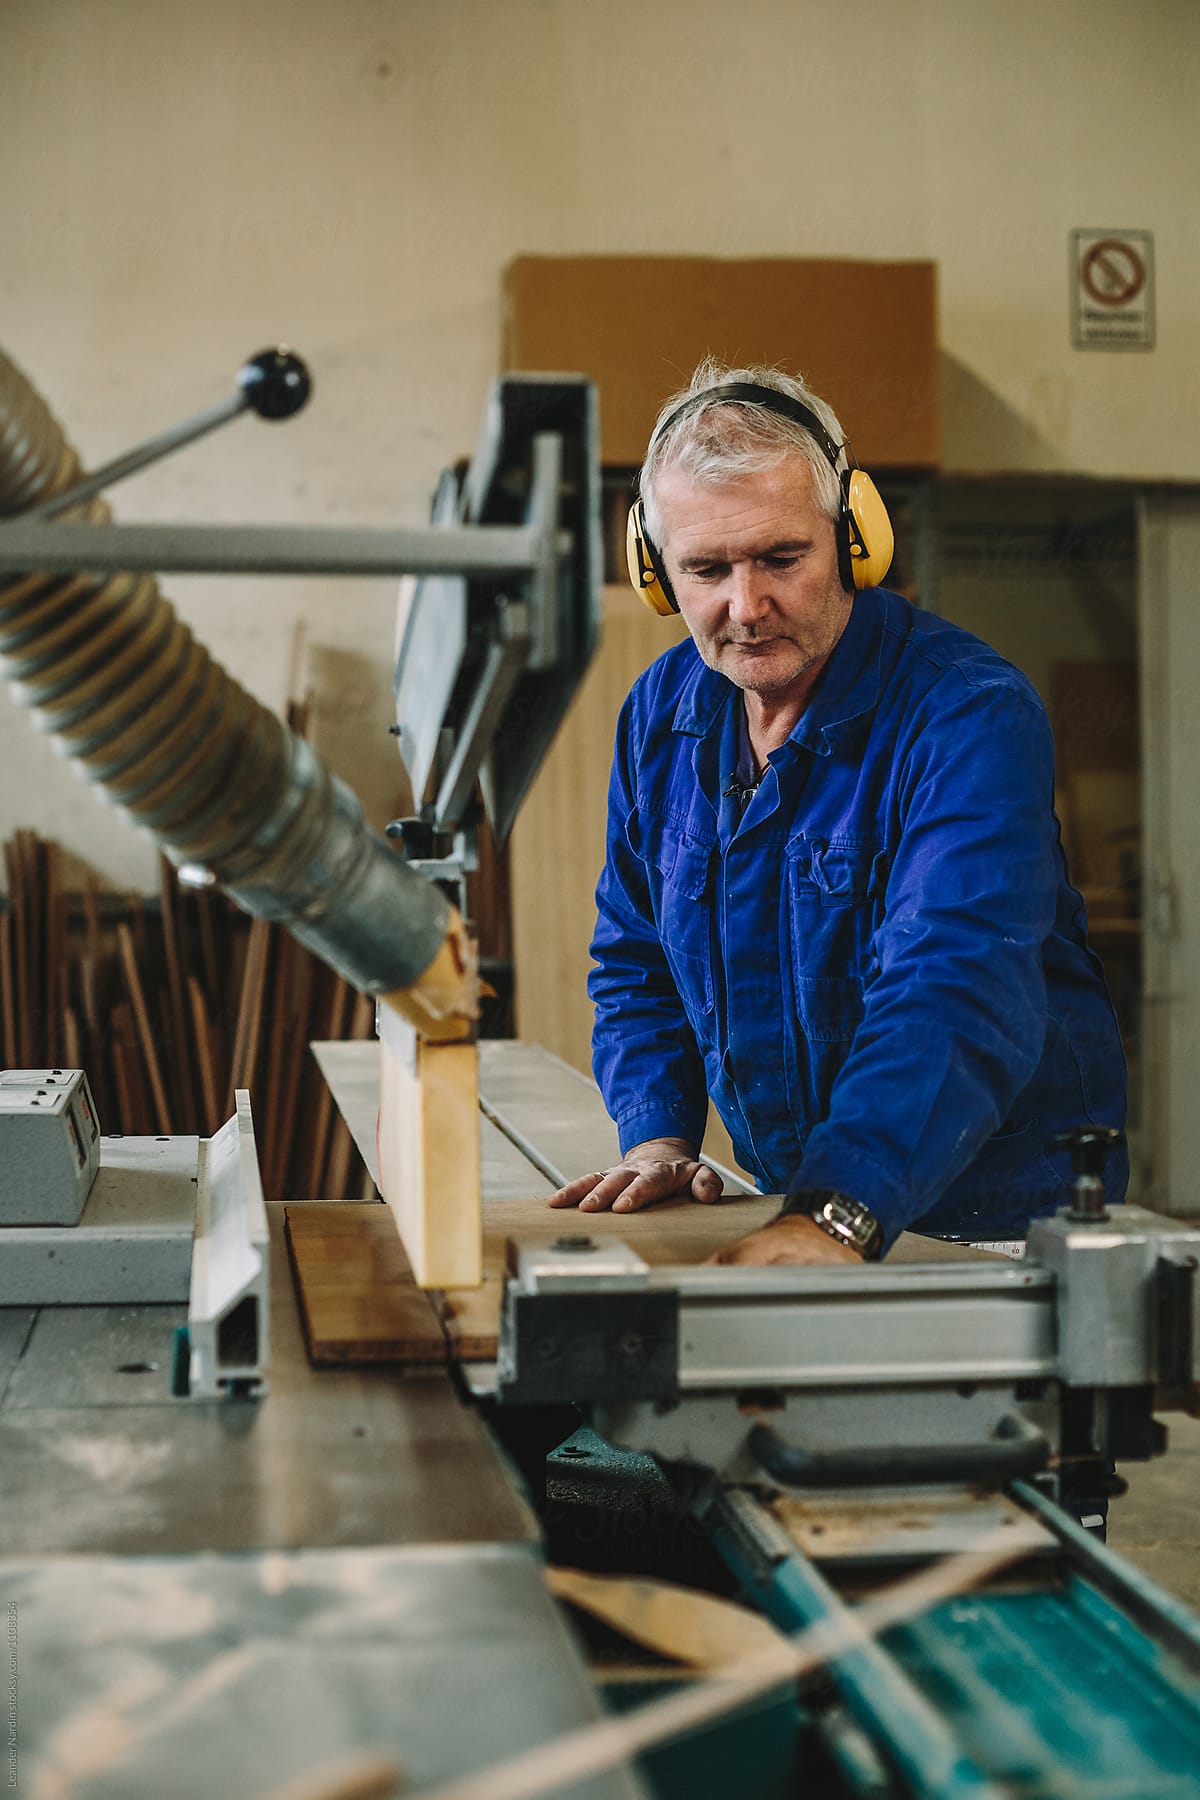 carpenter with yellow protection earmuffs working on a benchsaw